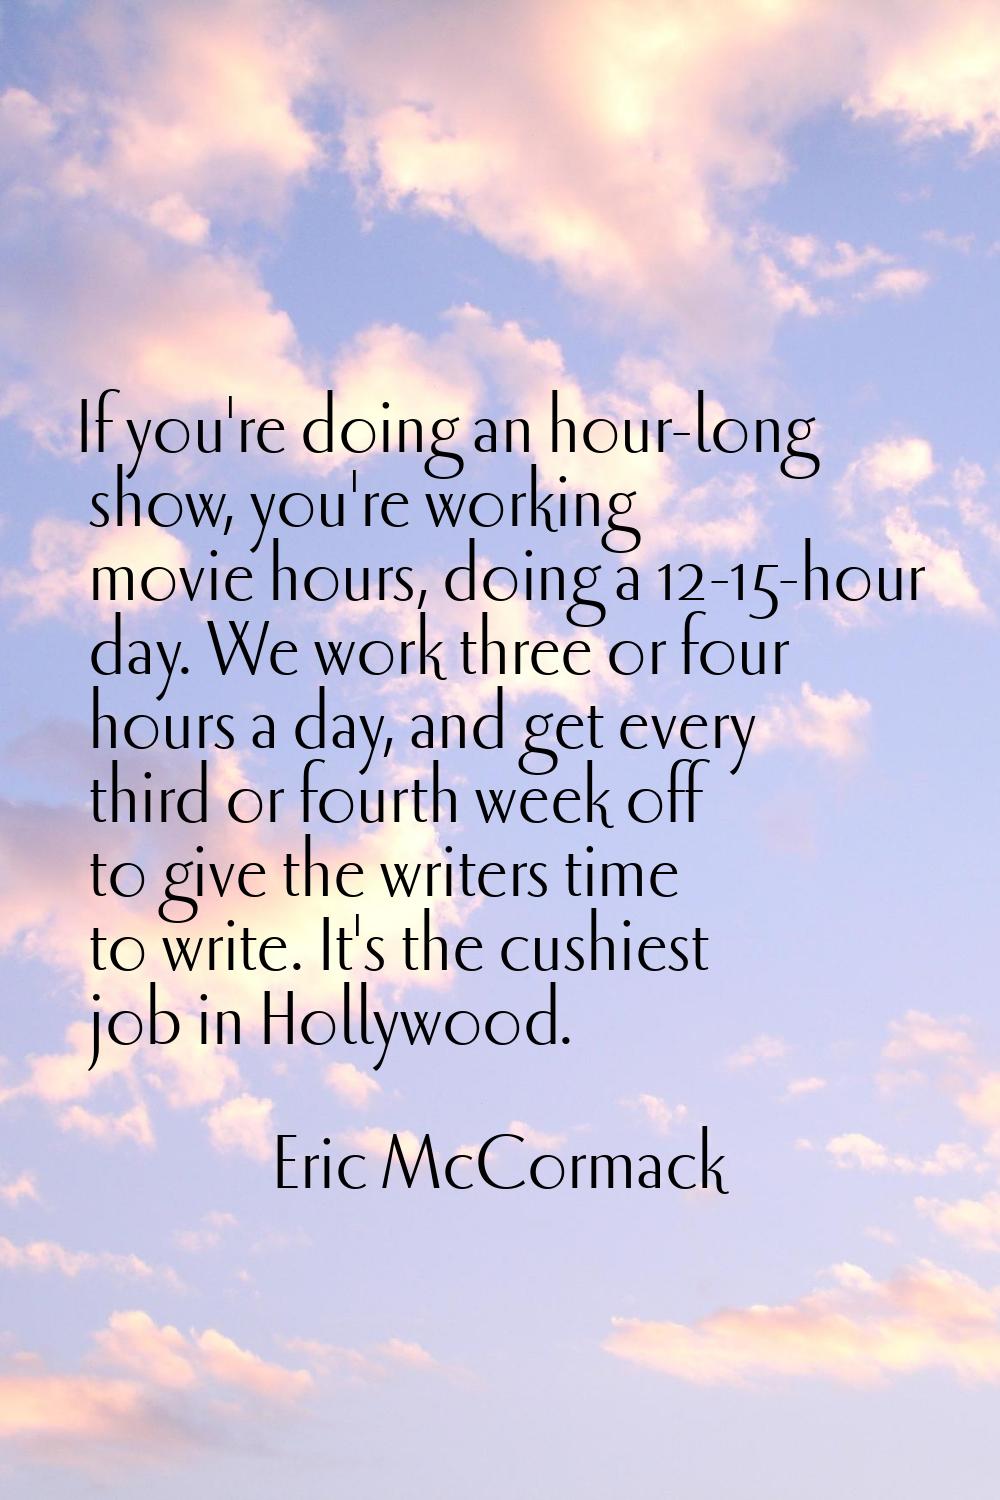 If you're doing an hour-long show, you're working movie hours, doing a 12-15-hour day. We work thre